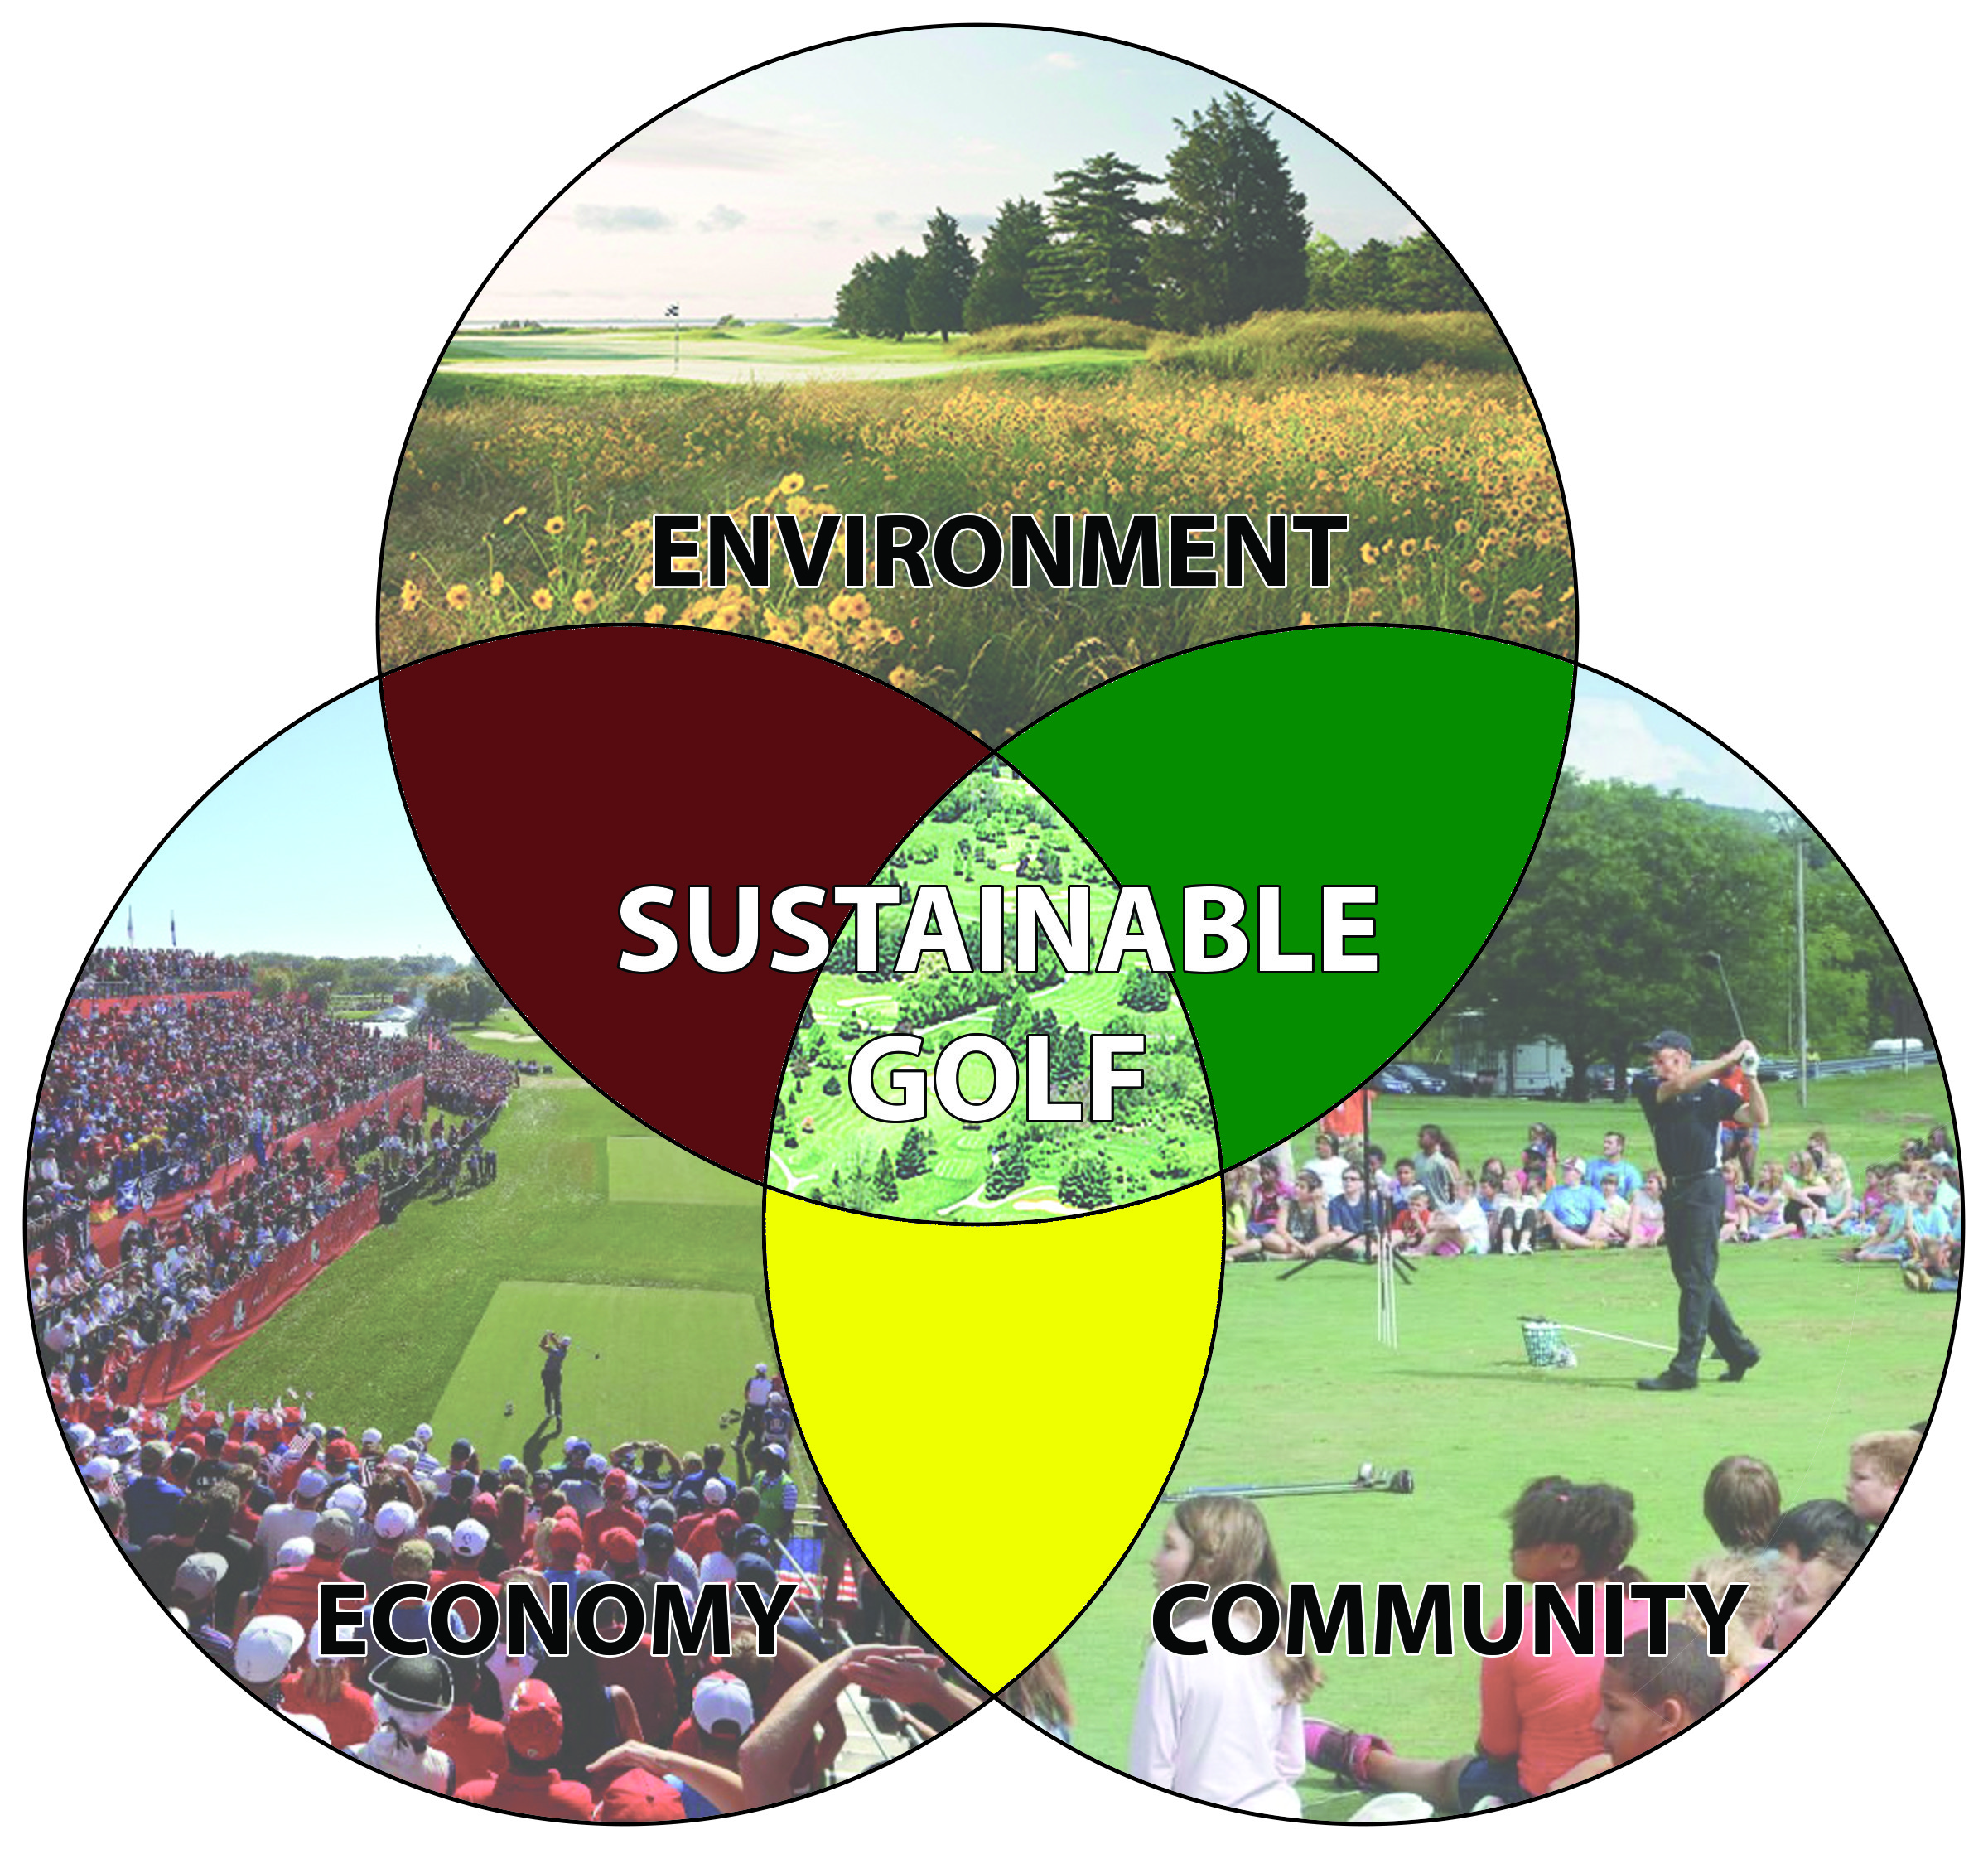 venn diagram of environment, economy and community with sustainable golf at the intersection